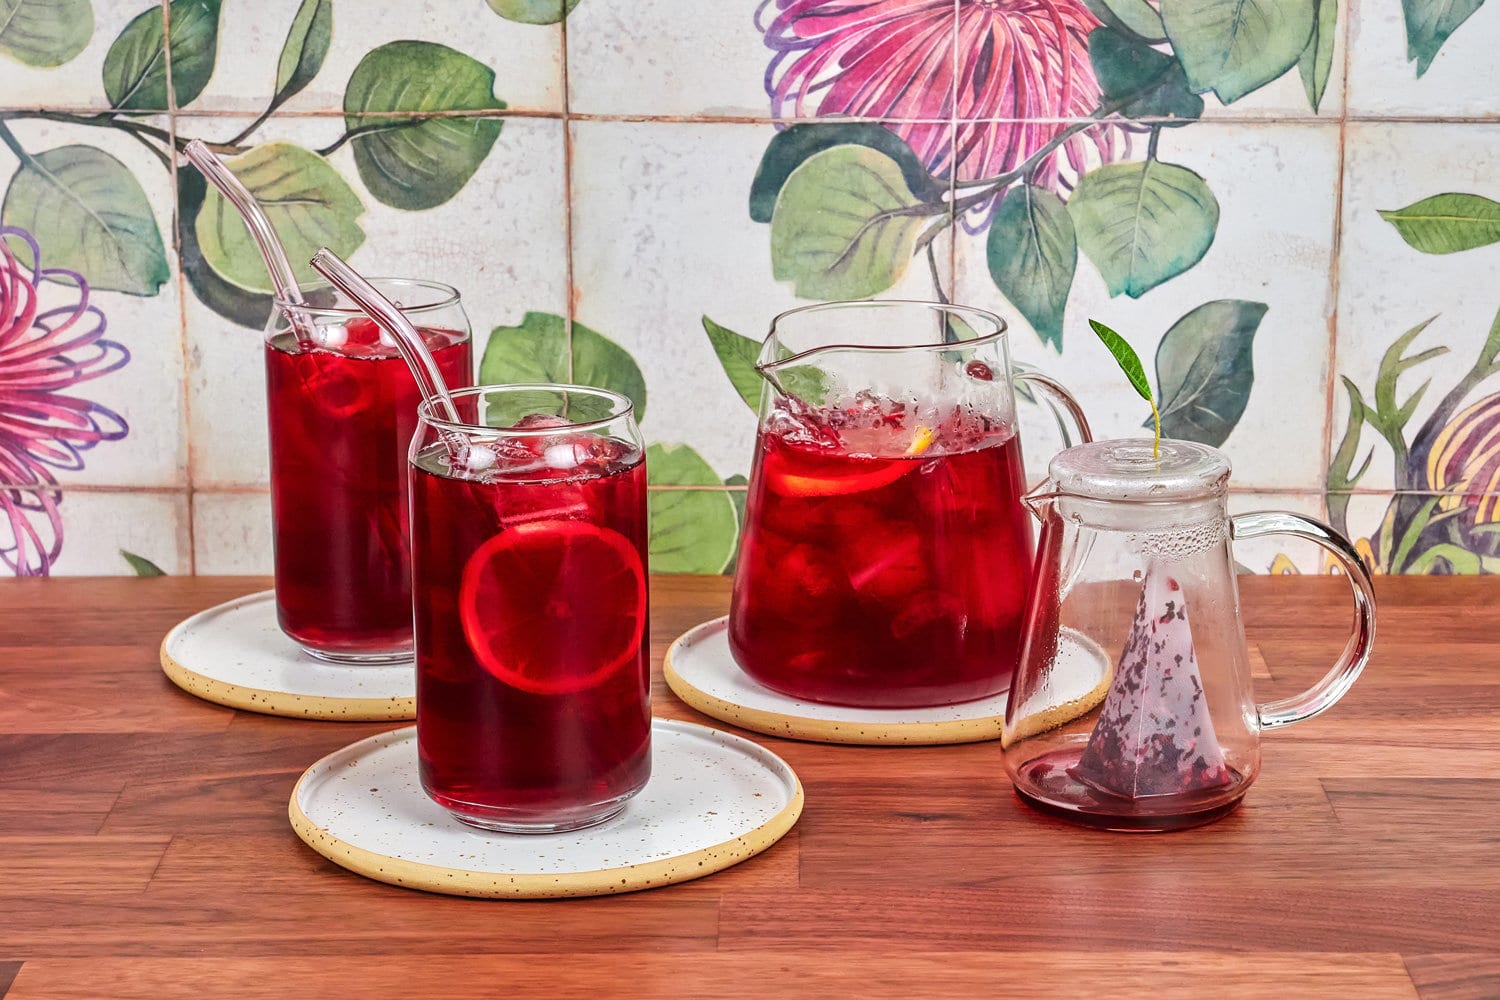 Raspberry ice tea in a special glass teapot, with two ice tea glasses and borosilicate straws, on a walnut table and ceramic tiles in the background.